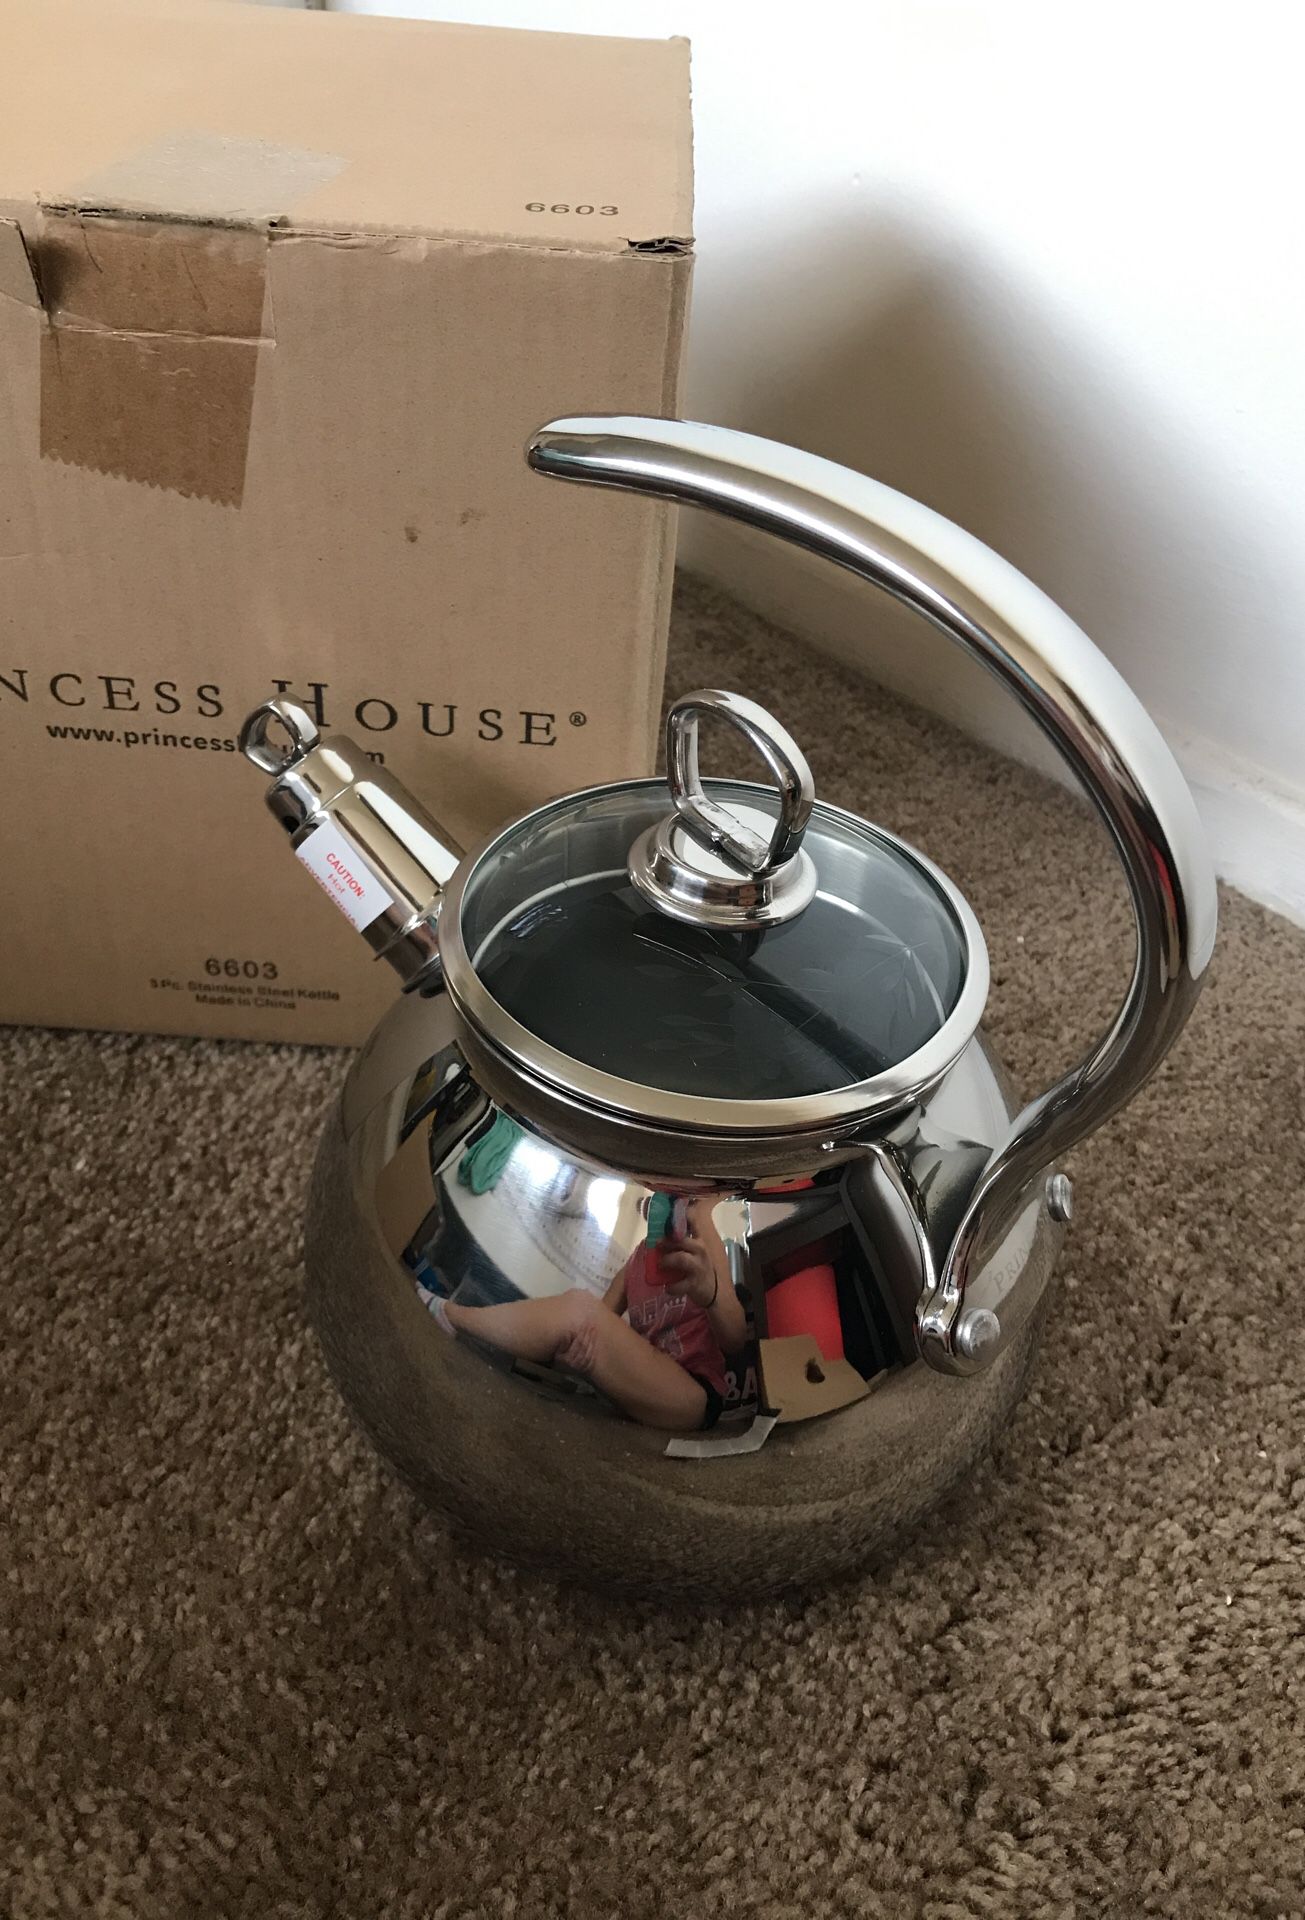 Primula Stewart Whistling Stovetop Tea Kettle for Sale in Chicago, IL -  OfferUp